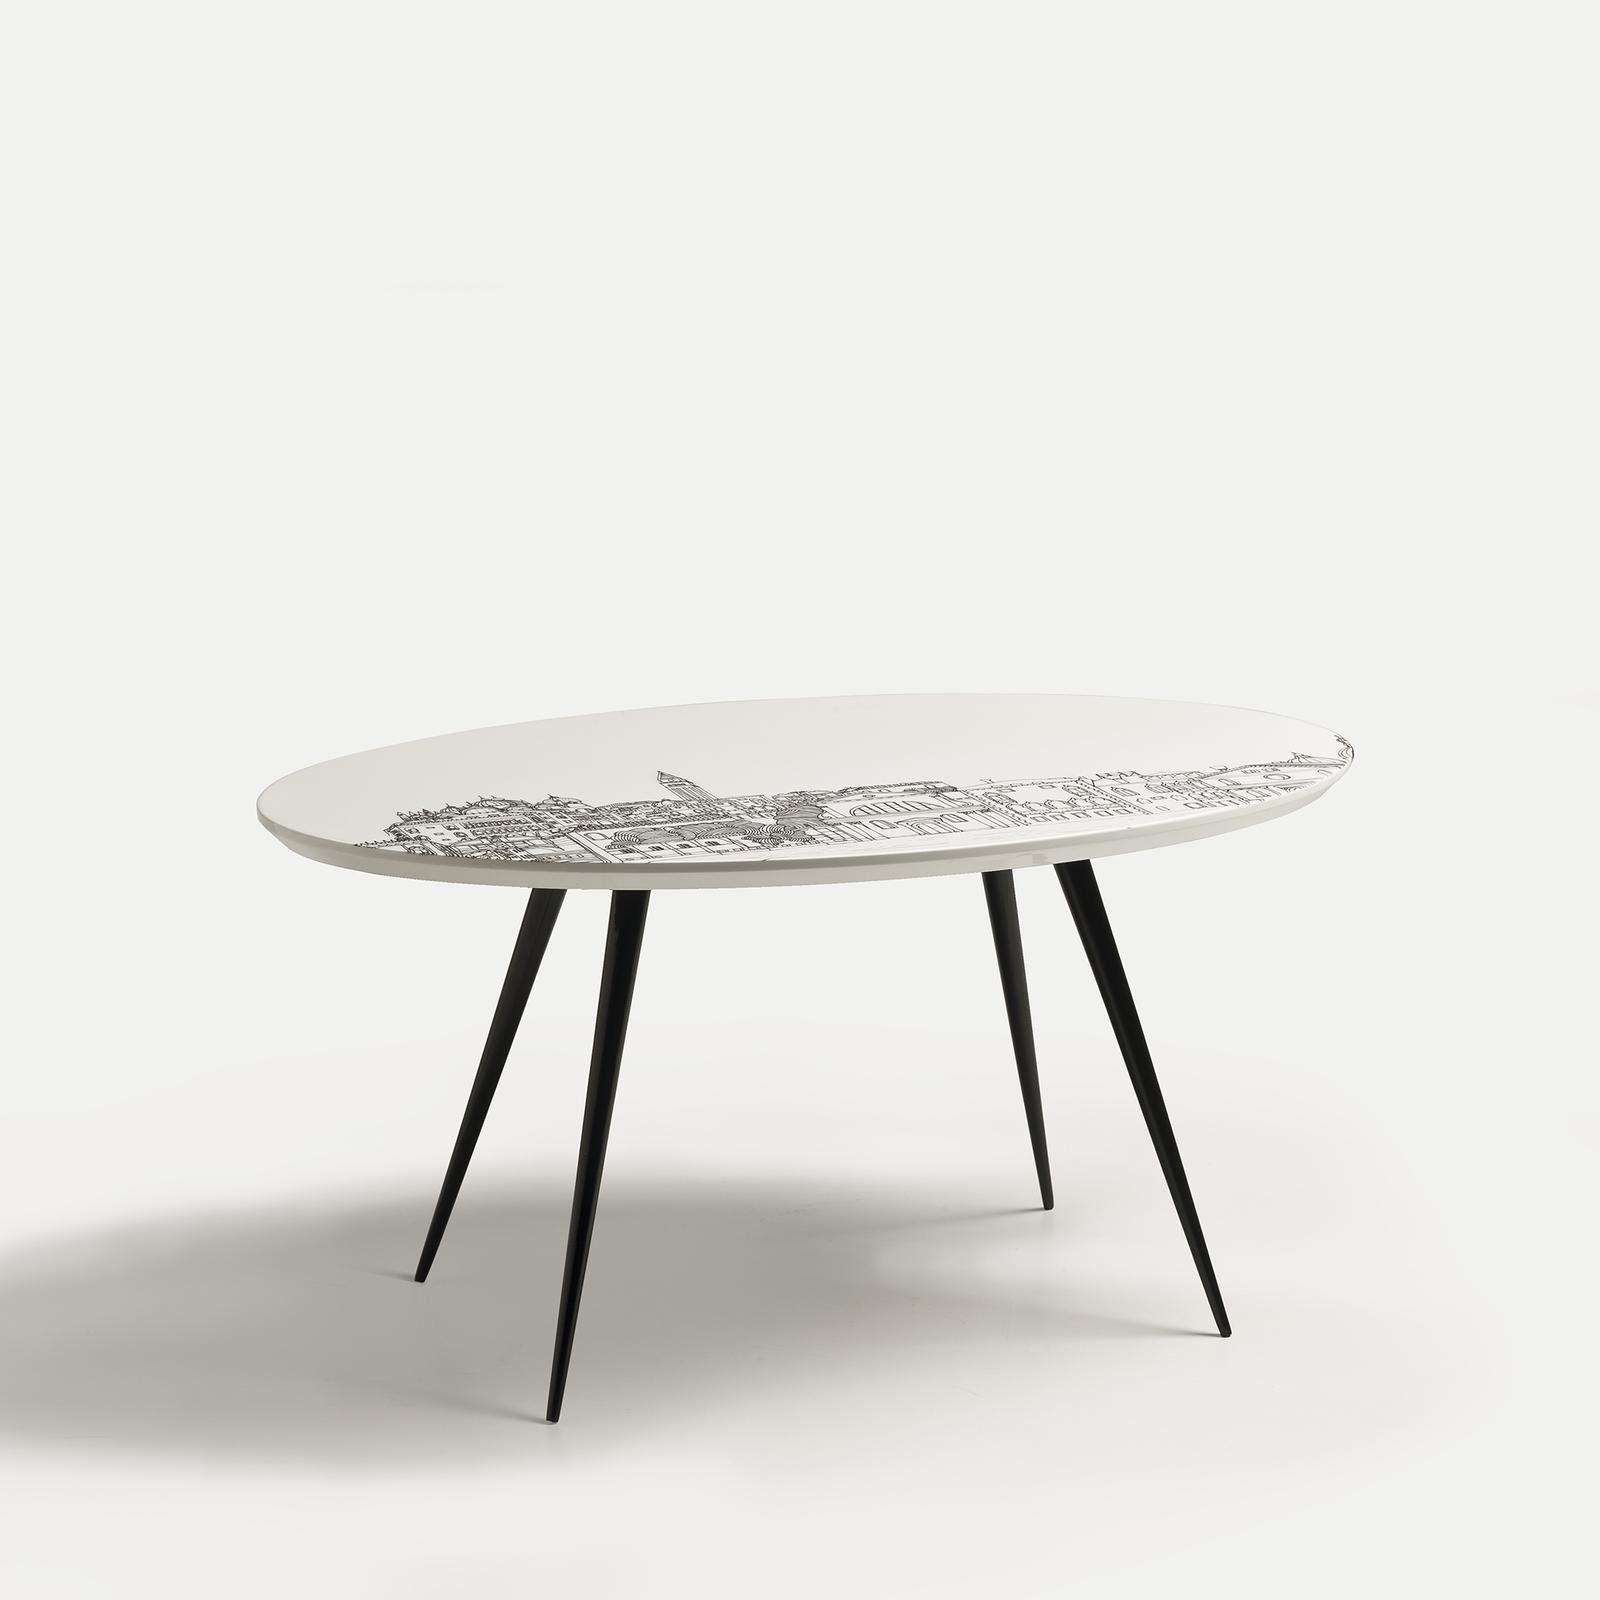 This modern coffee table is part of the Venezia Series of modern tables designed by Anna Sutor and inspired by the Venetian landscapes with its iconic architecture. Made entirely of wood, four slim, slanted legs with lacquered black finish support a